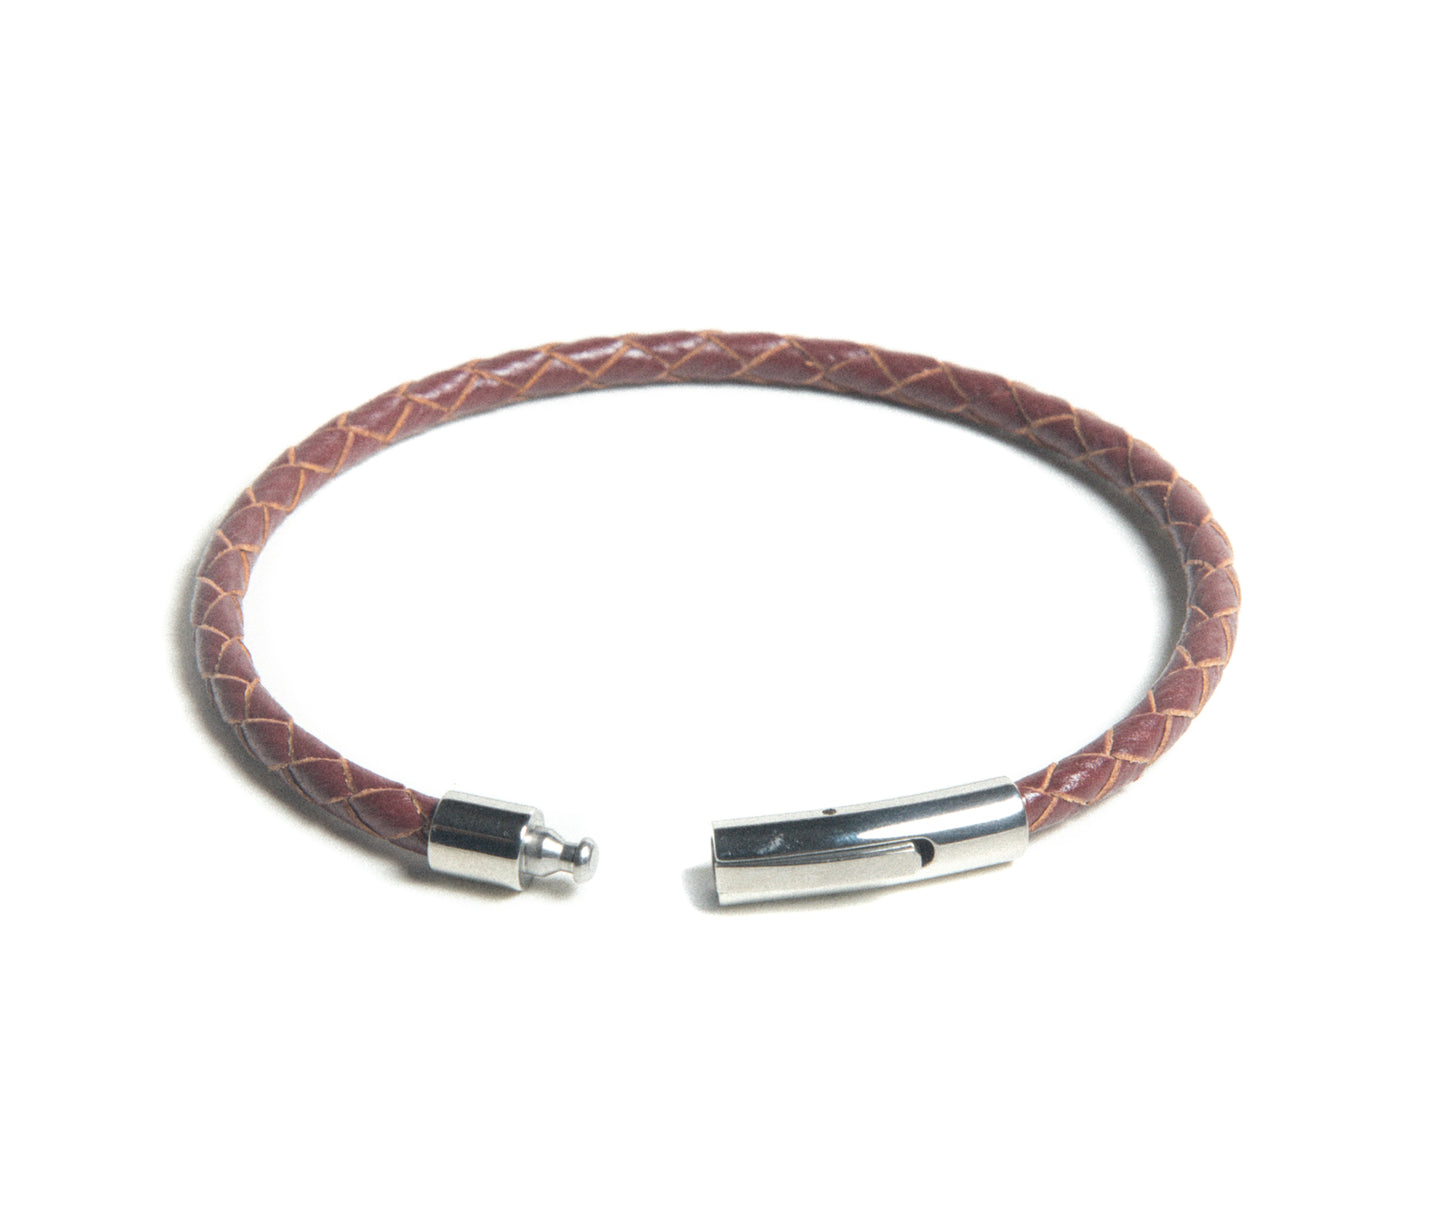 Mens Braided Handcrafted light Brown Leather Bracelet Stainless Steel Clasp Closure at RM Kandy